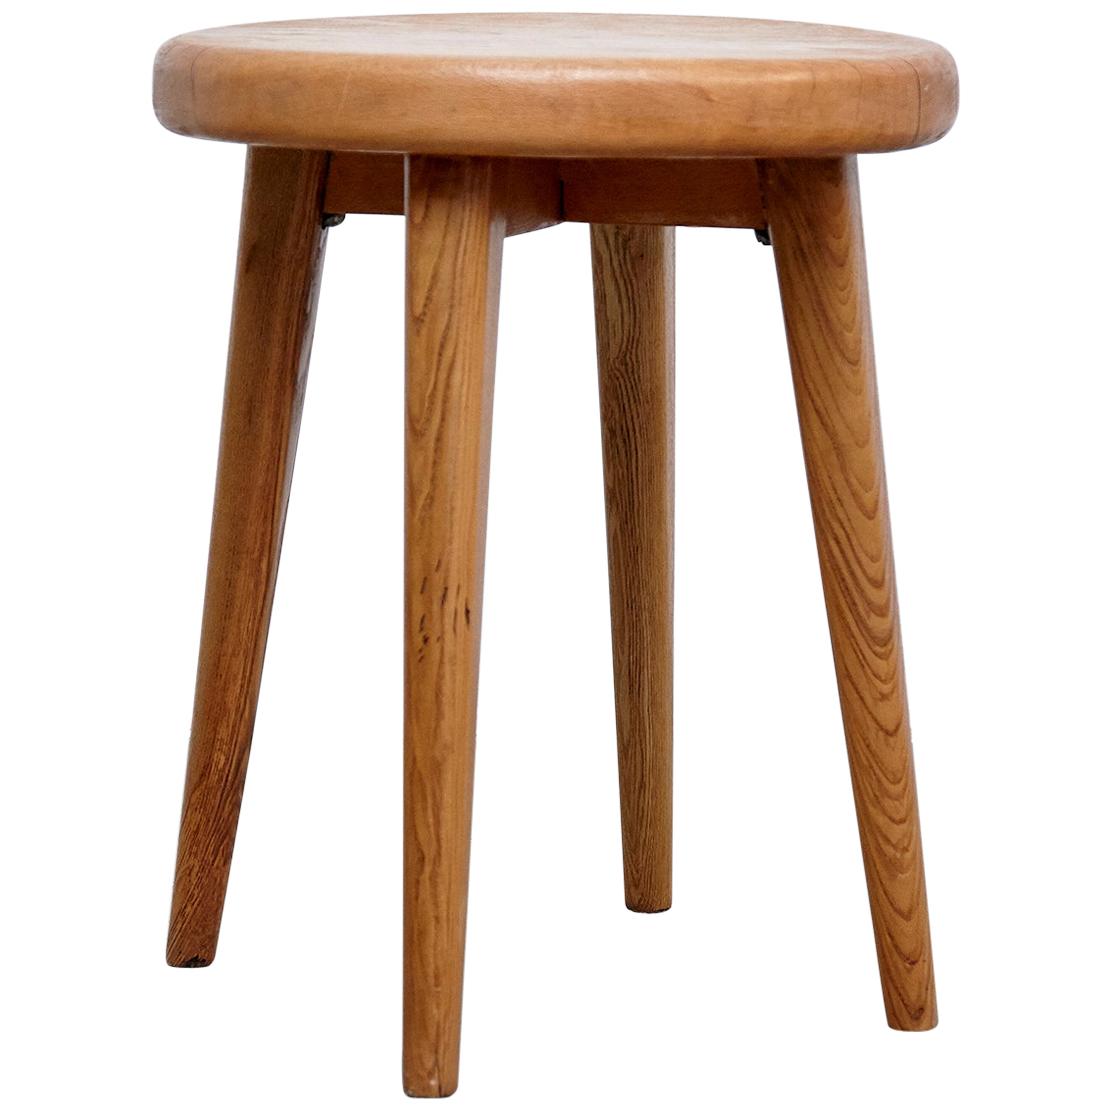 After Pierre Jeanneret, Mid-Century Modern, Wood French Side Table, circa 1960